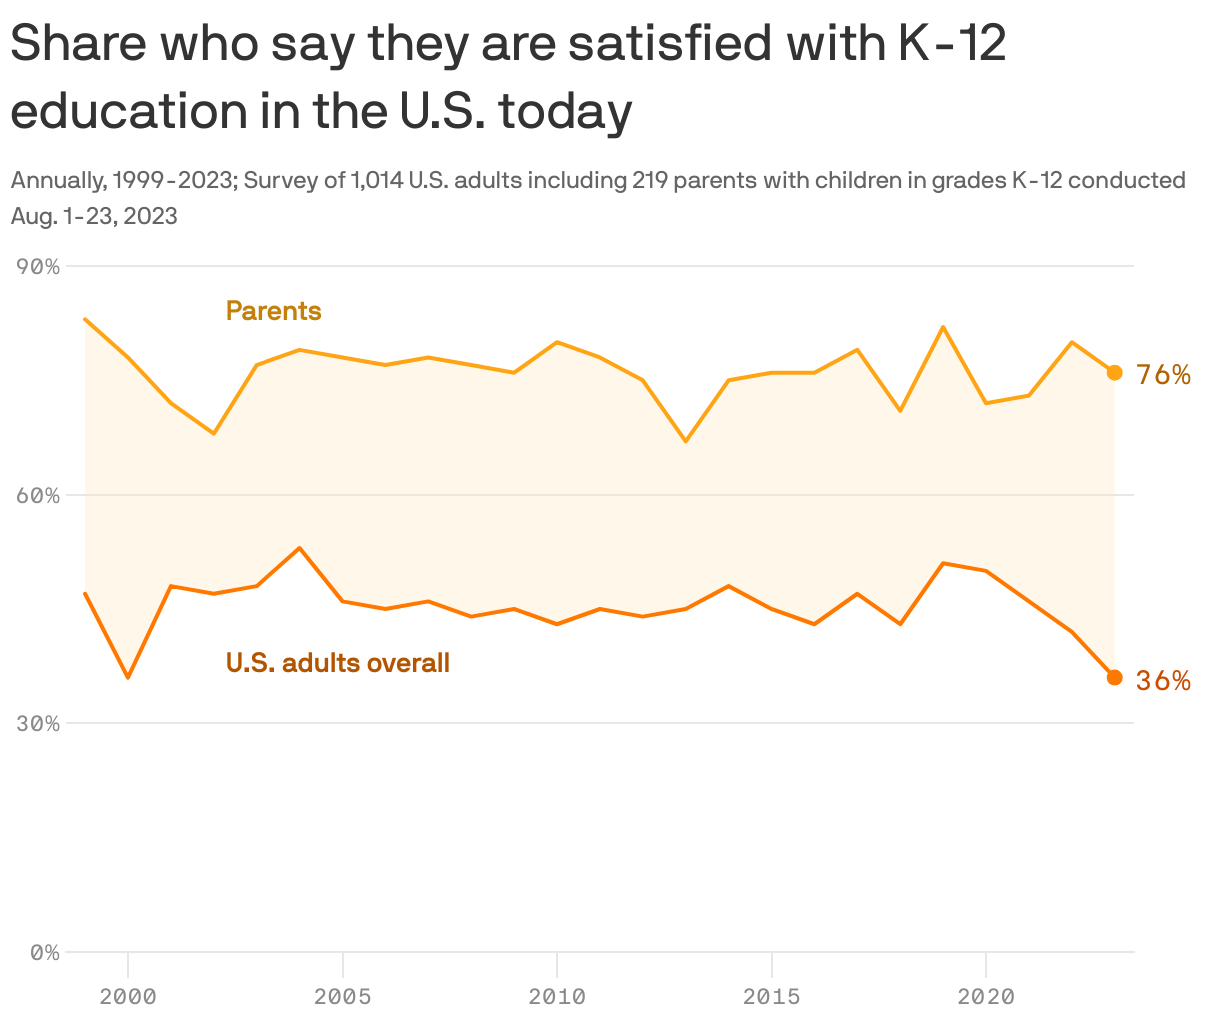 Share who say they are satisfied with K-12 education in the U.S. today